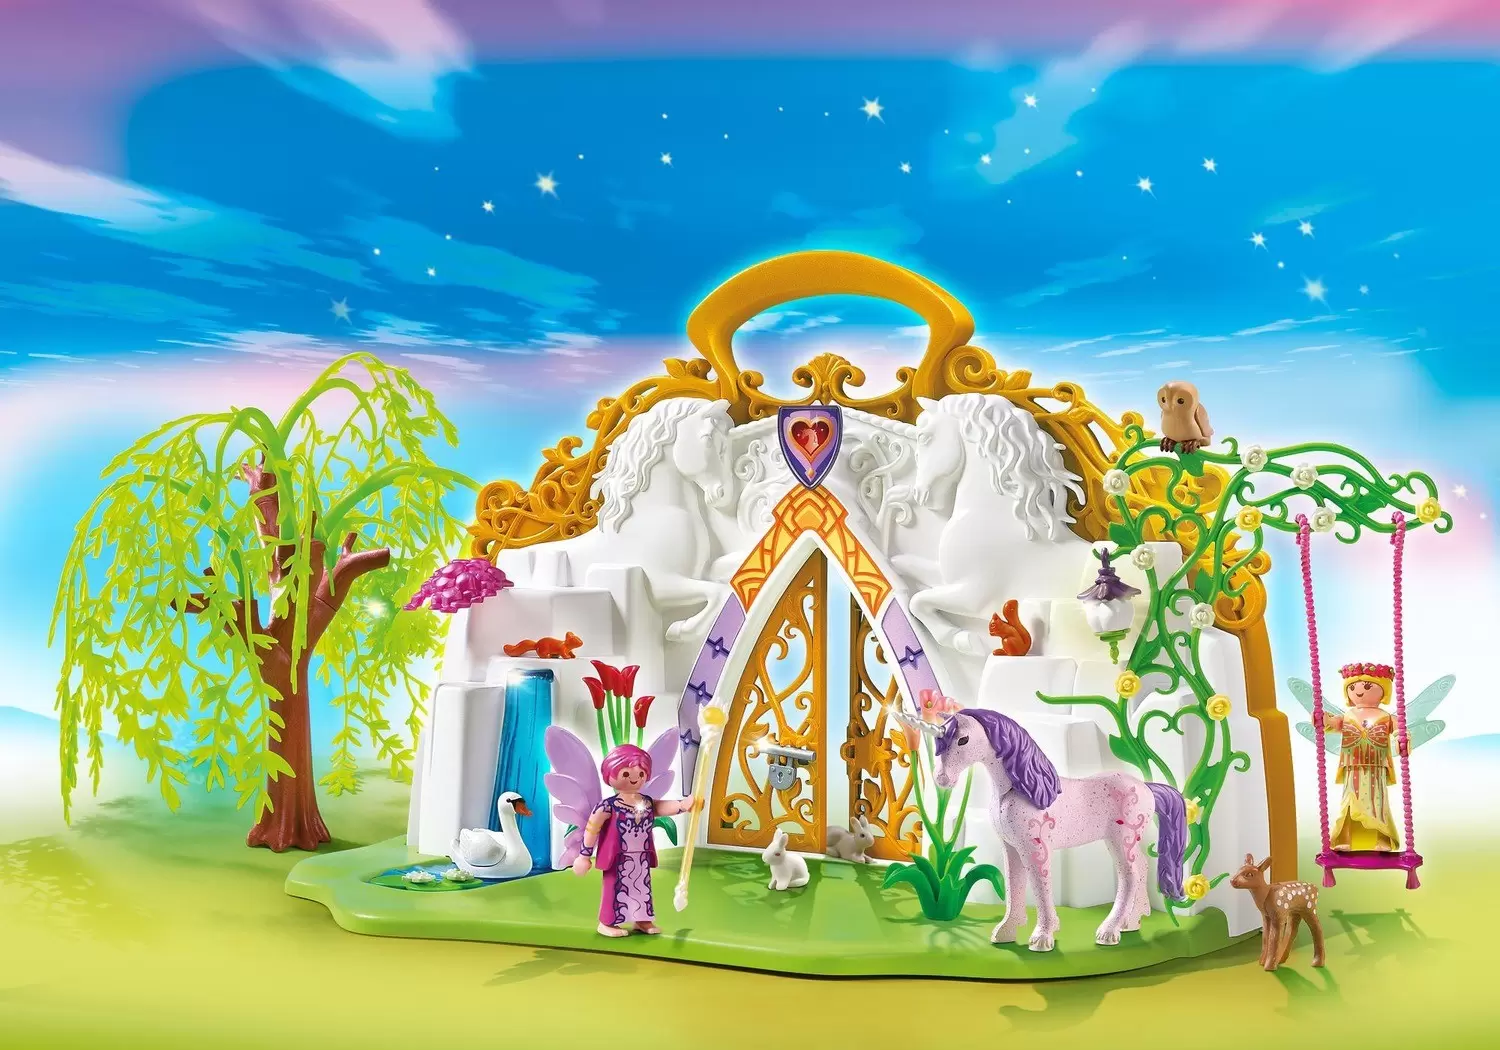 Playmobil Fairies - Enchanted Park of the Fairies and Unicorn Carry case